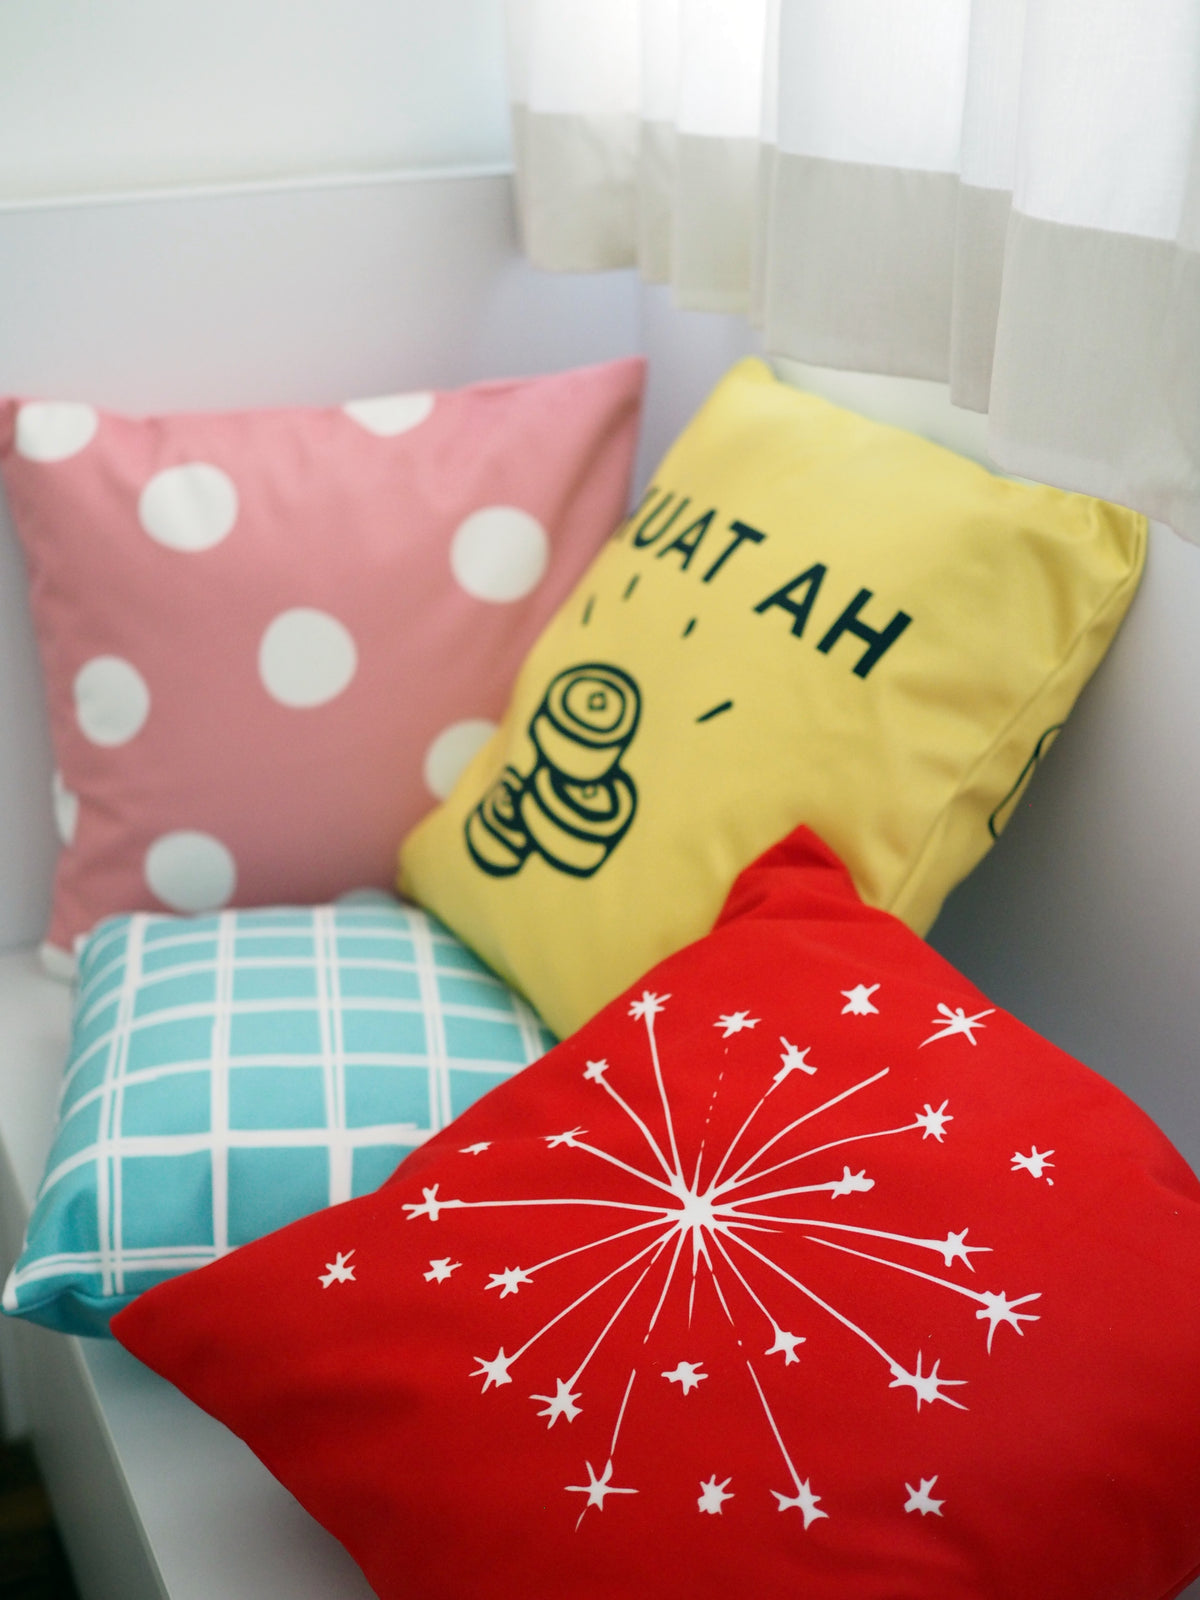 Flannel Double Sided Printed CNY HENG AH Cushion Covers PPD657B